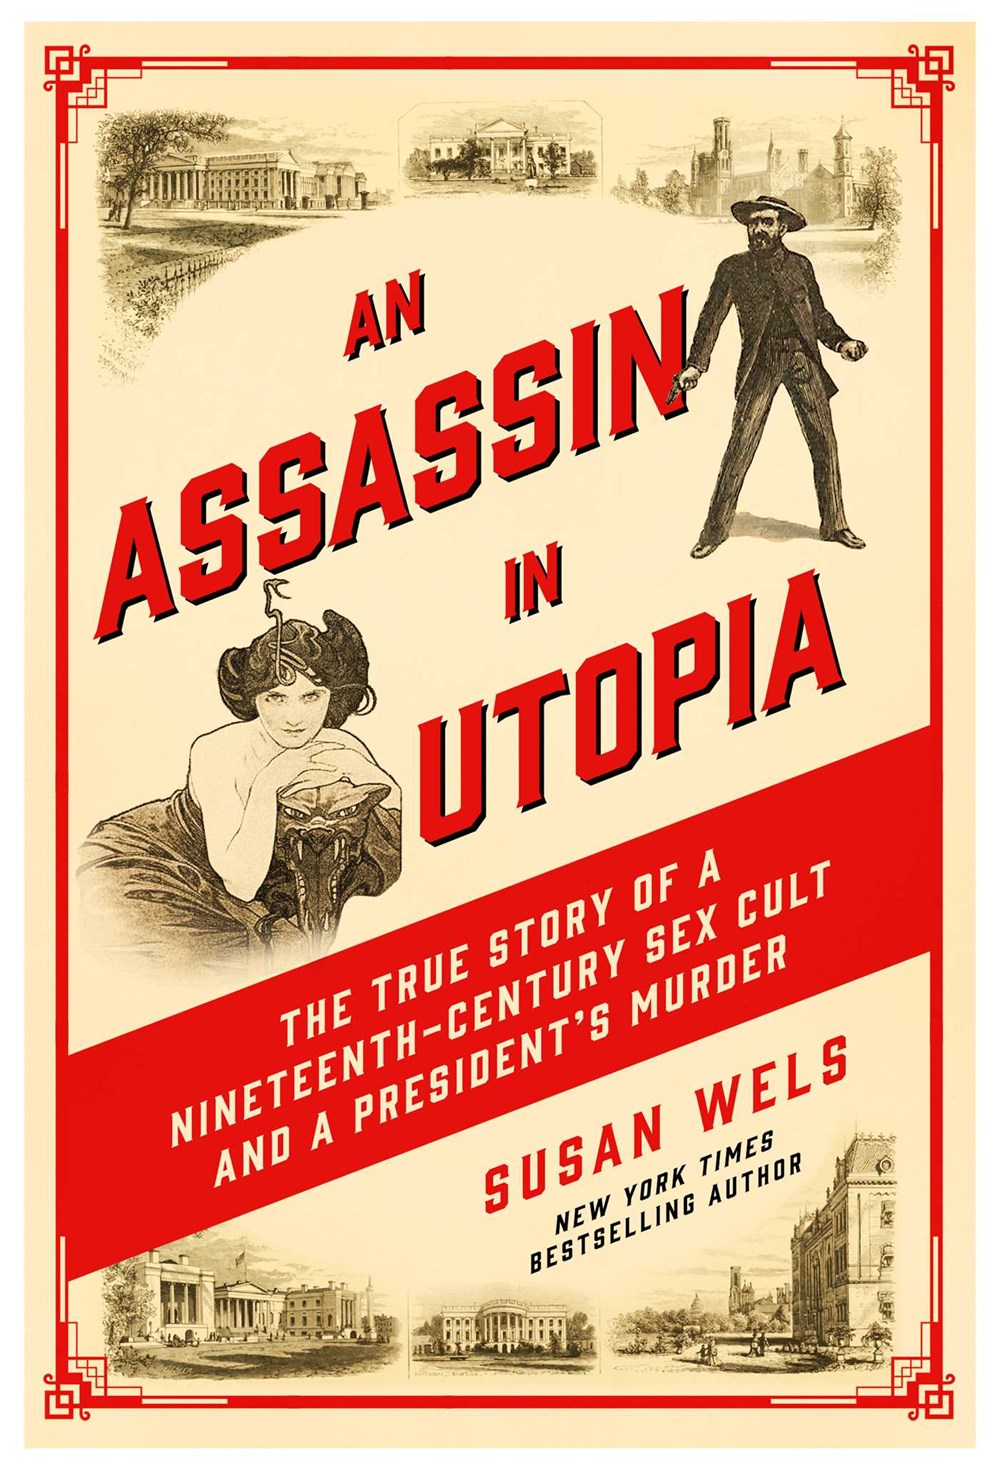 An Assassin in Utopia: The True Story of a Nineteenth-Century Sex Cult and a President’s Murder